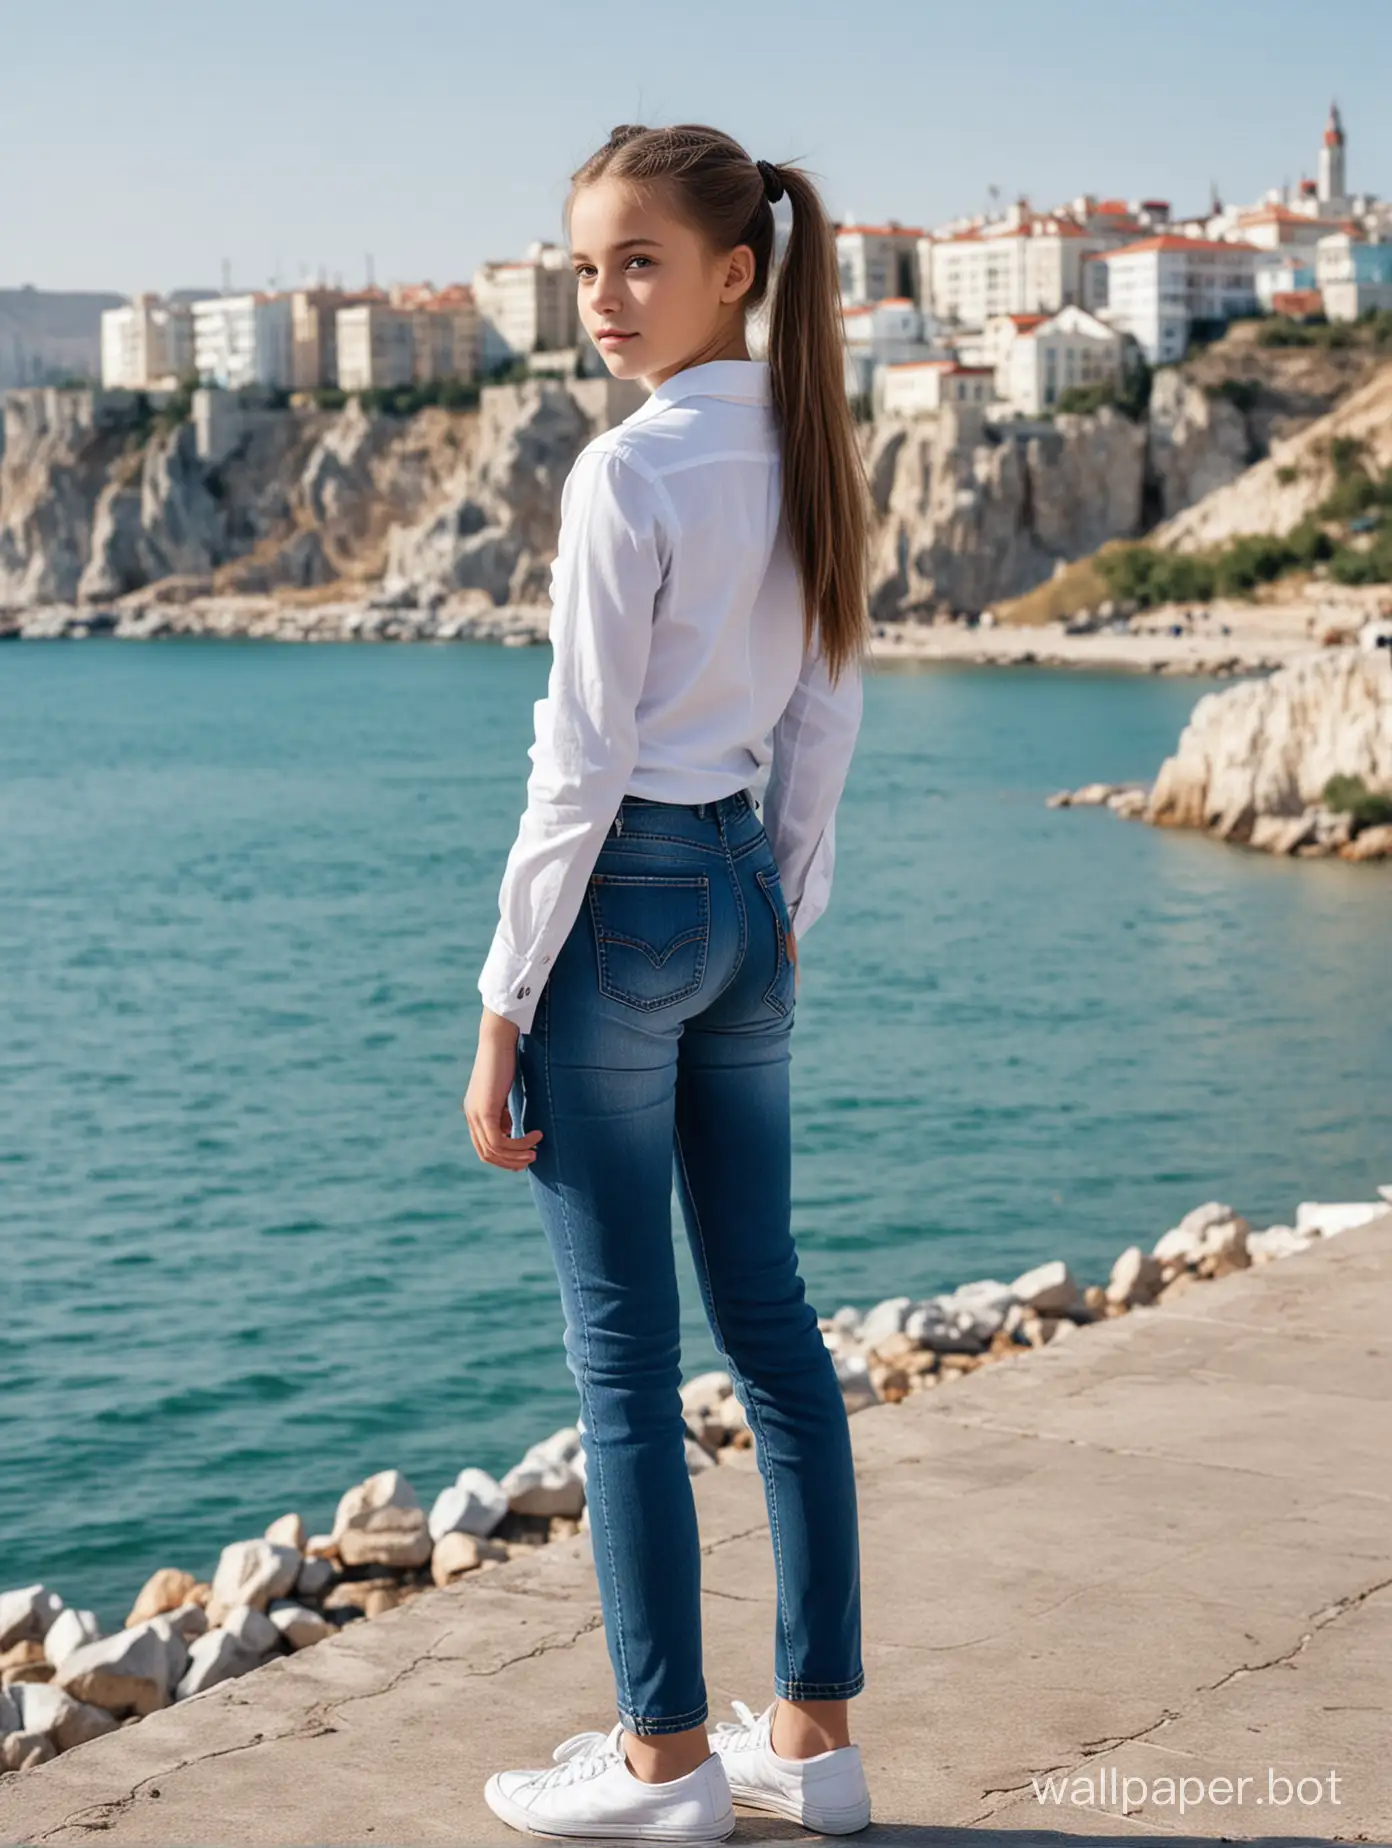 Young-Soviet-Girl-in-Crimea-with-Energetic-Pose-and-Vibrant-Scenery